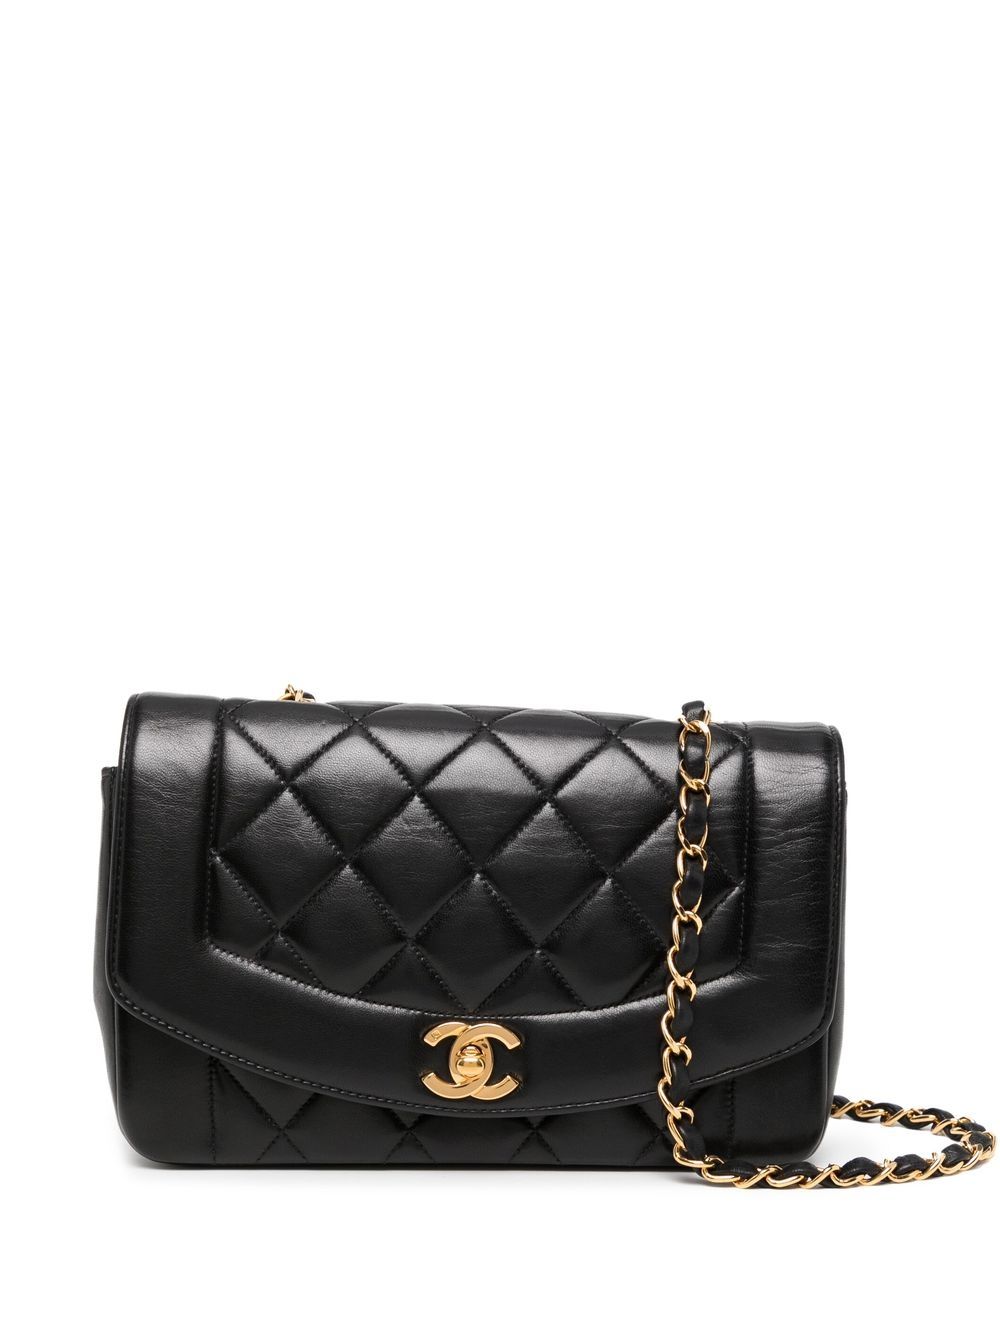 CHANEL Pre-Owned 1997 Small Diana Shoulder Bag - Farfetch